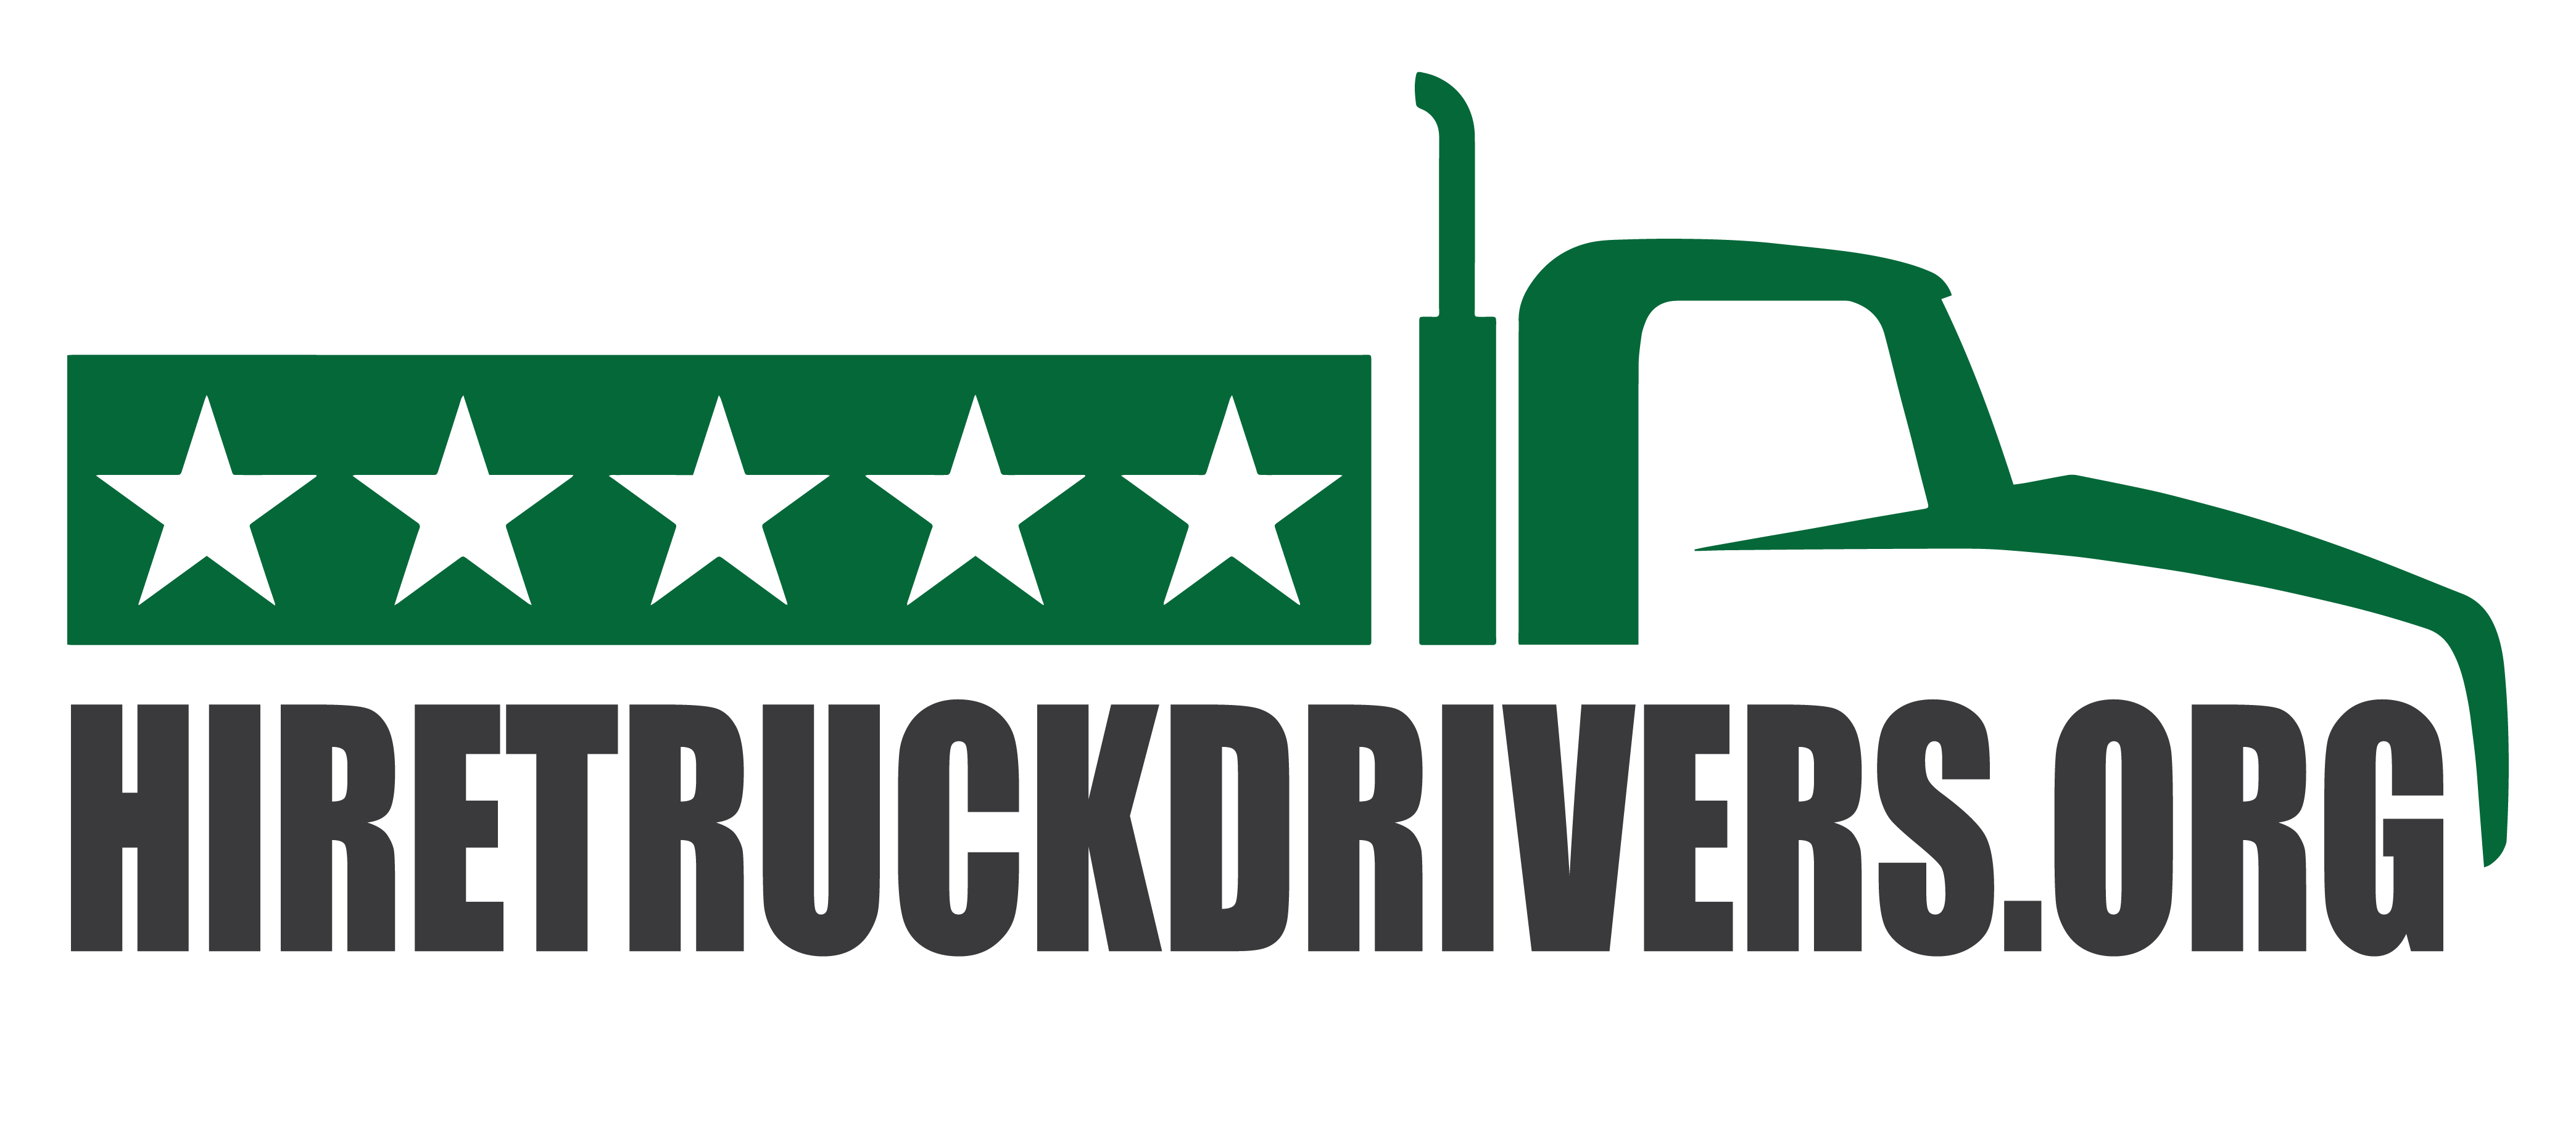 Hire Truck Drivers